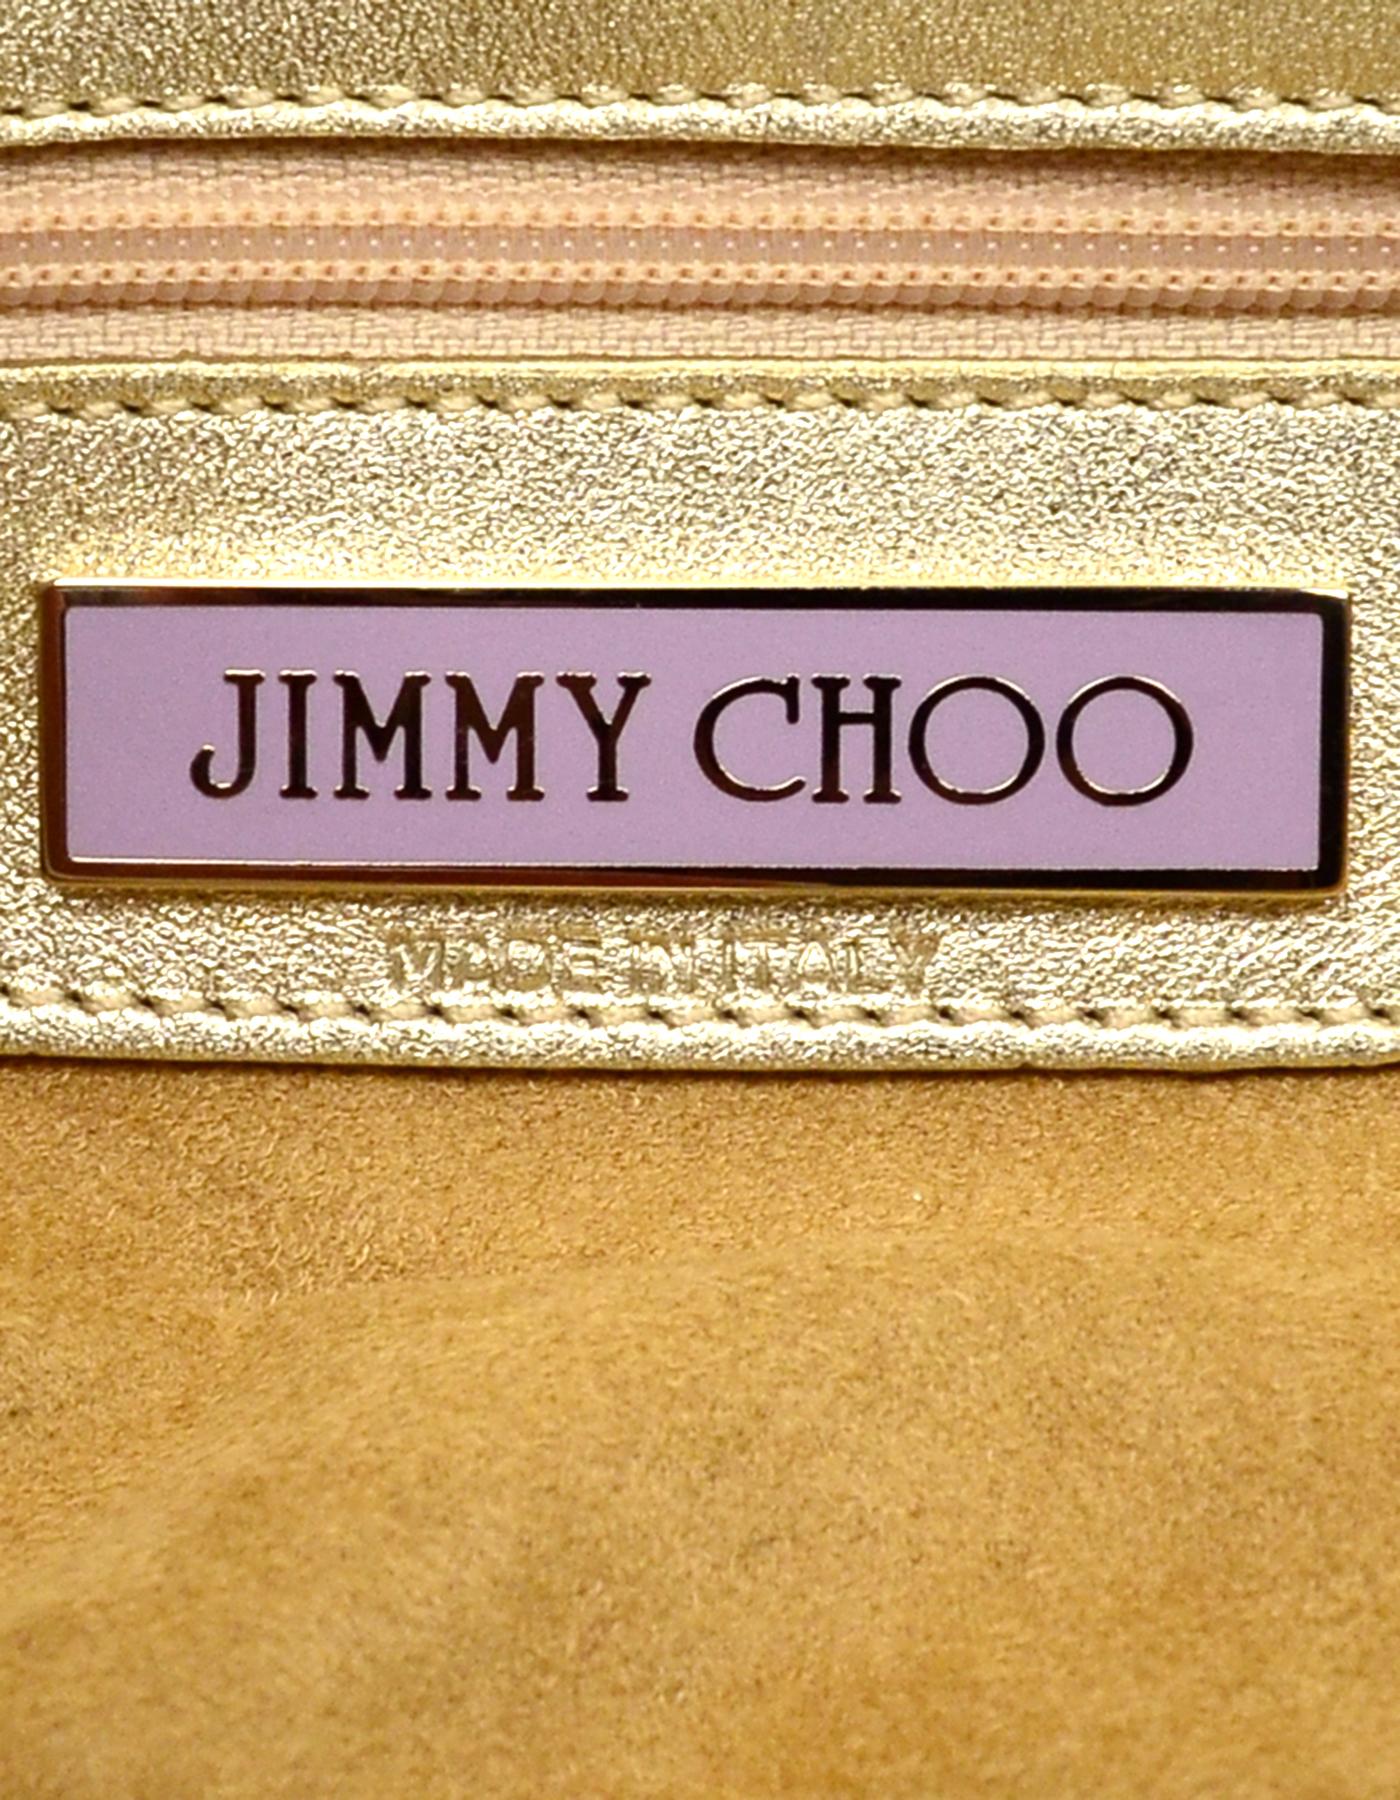 Jimmy Choo Gold Lame Leather Small Pochette Bag 5